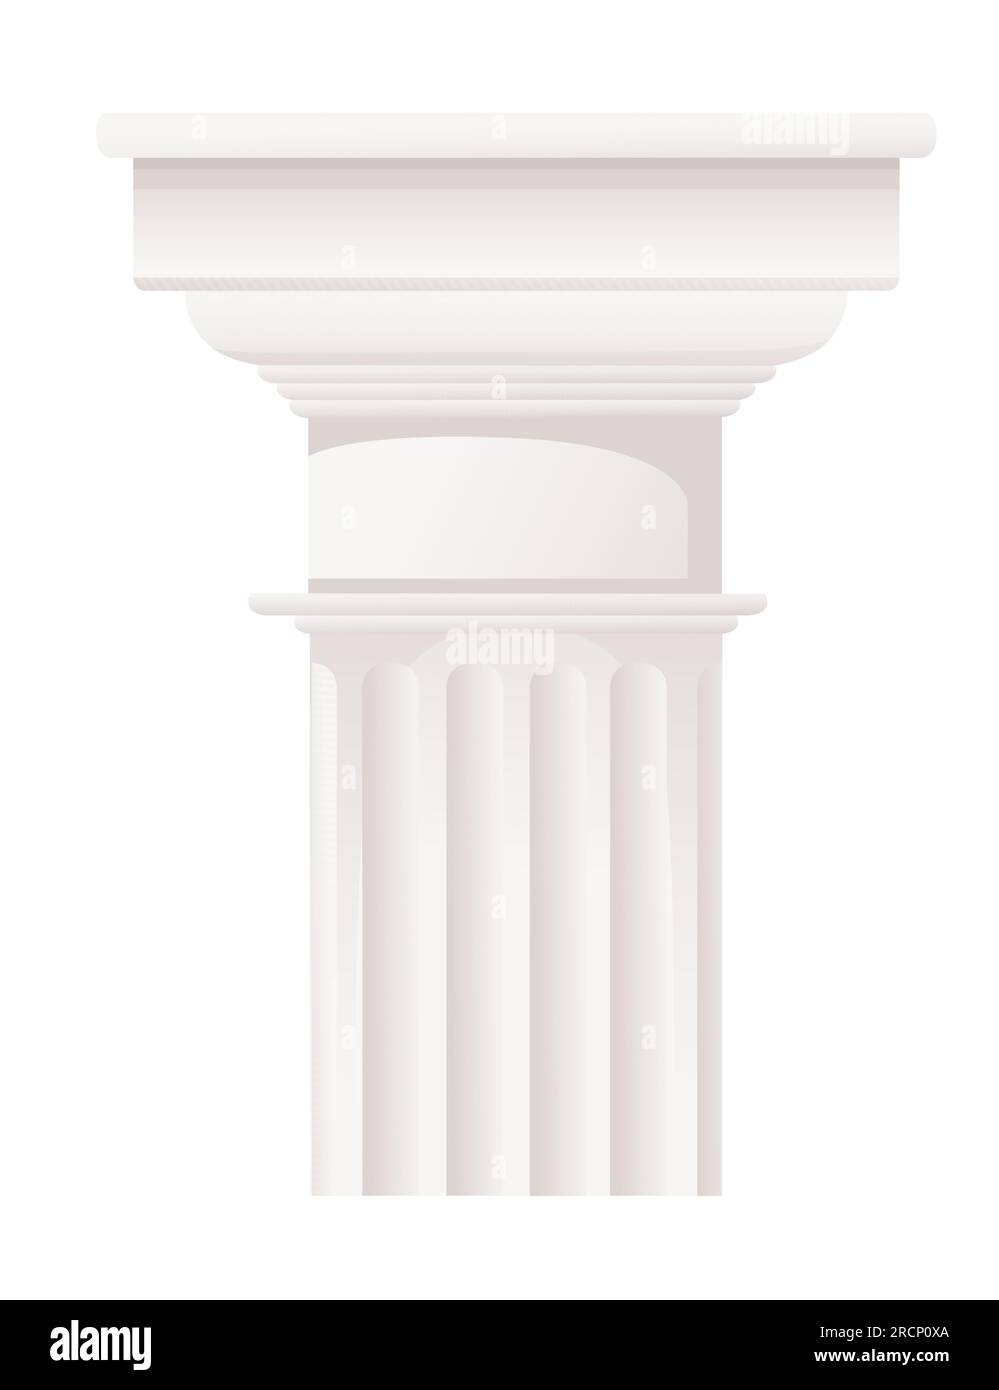 White ancient style column classic architecture design vector illustration isolated on white background Stock Vector